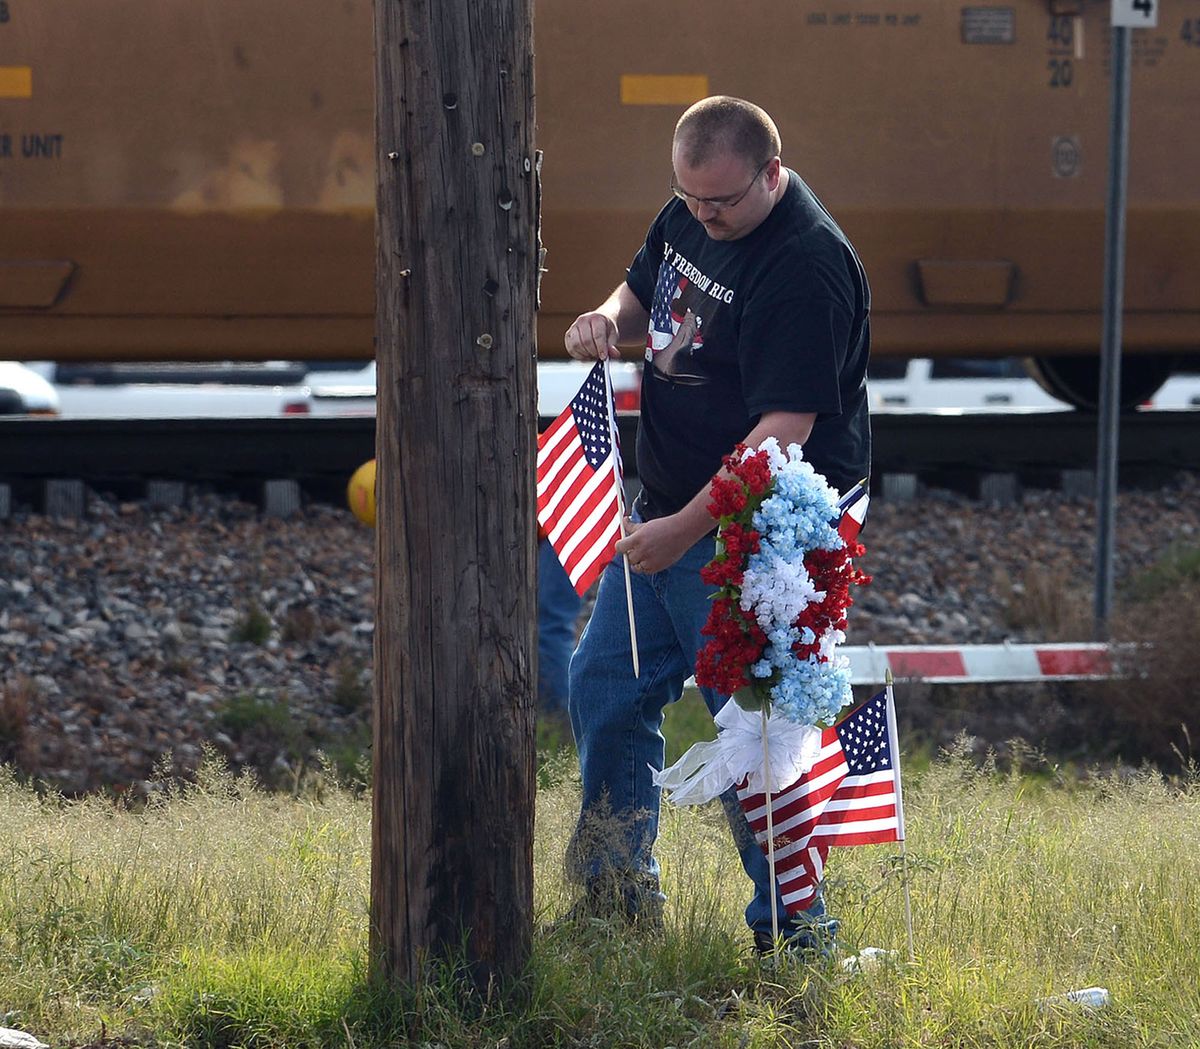 Midland, Texas resident Jerry Cook places a wreath his mother made and two U.S. flags Friday, Nov. 16, 2012 at the location where a train struck a flatbed trailer carrying veterans in a parade Thursday afternoon, killing four. (Mark Sterkel / Odessa American)